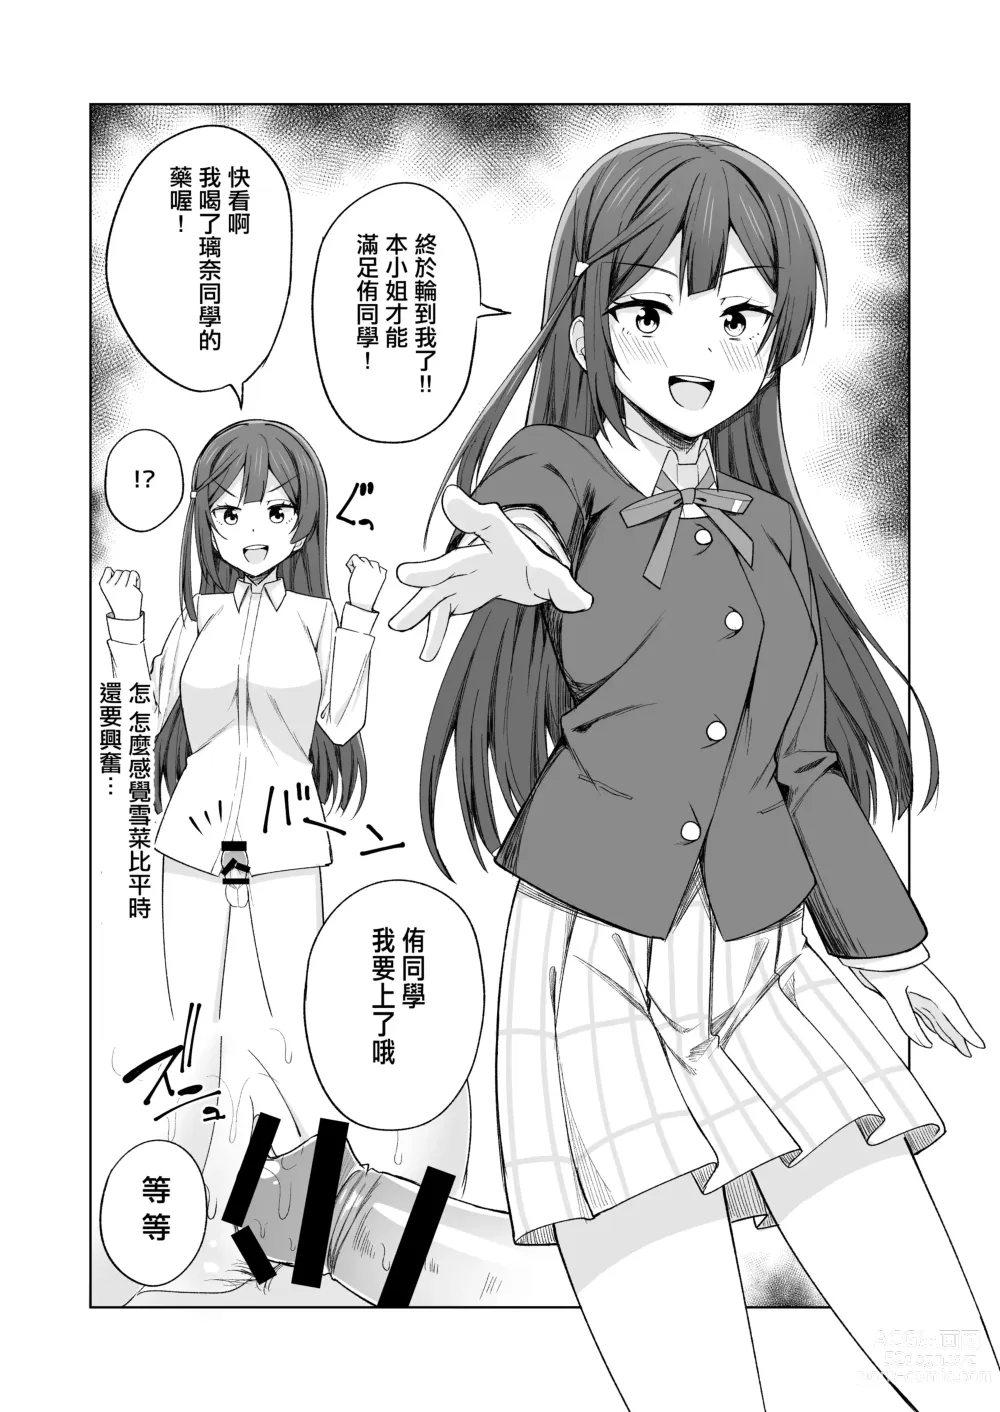 Page 15 of doujinshi 誕生的悸動